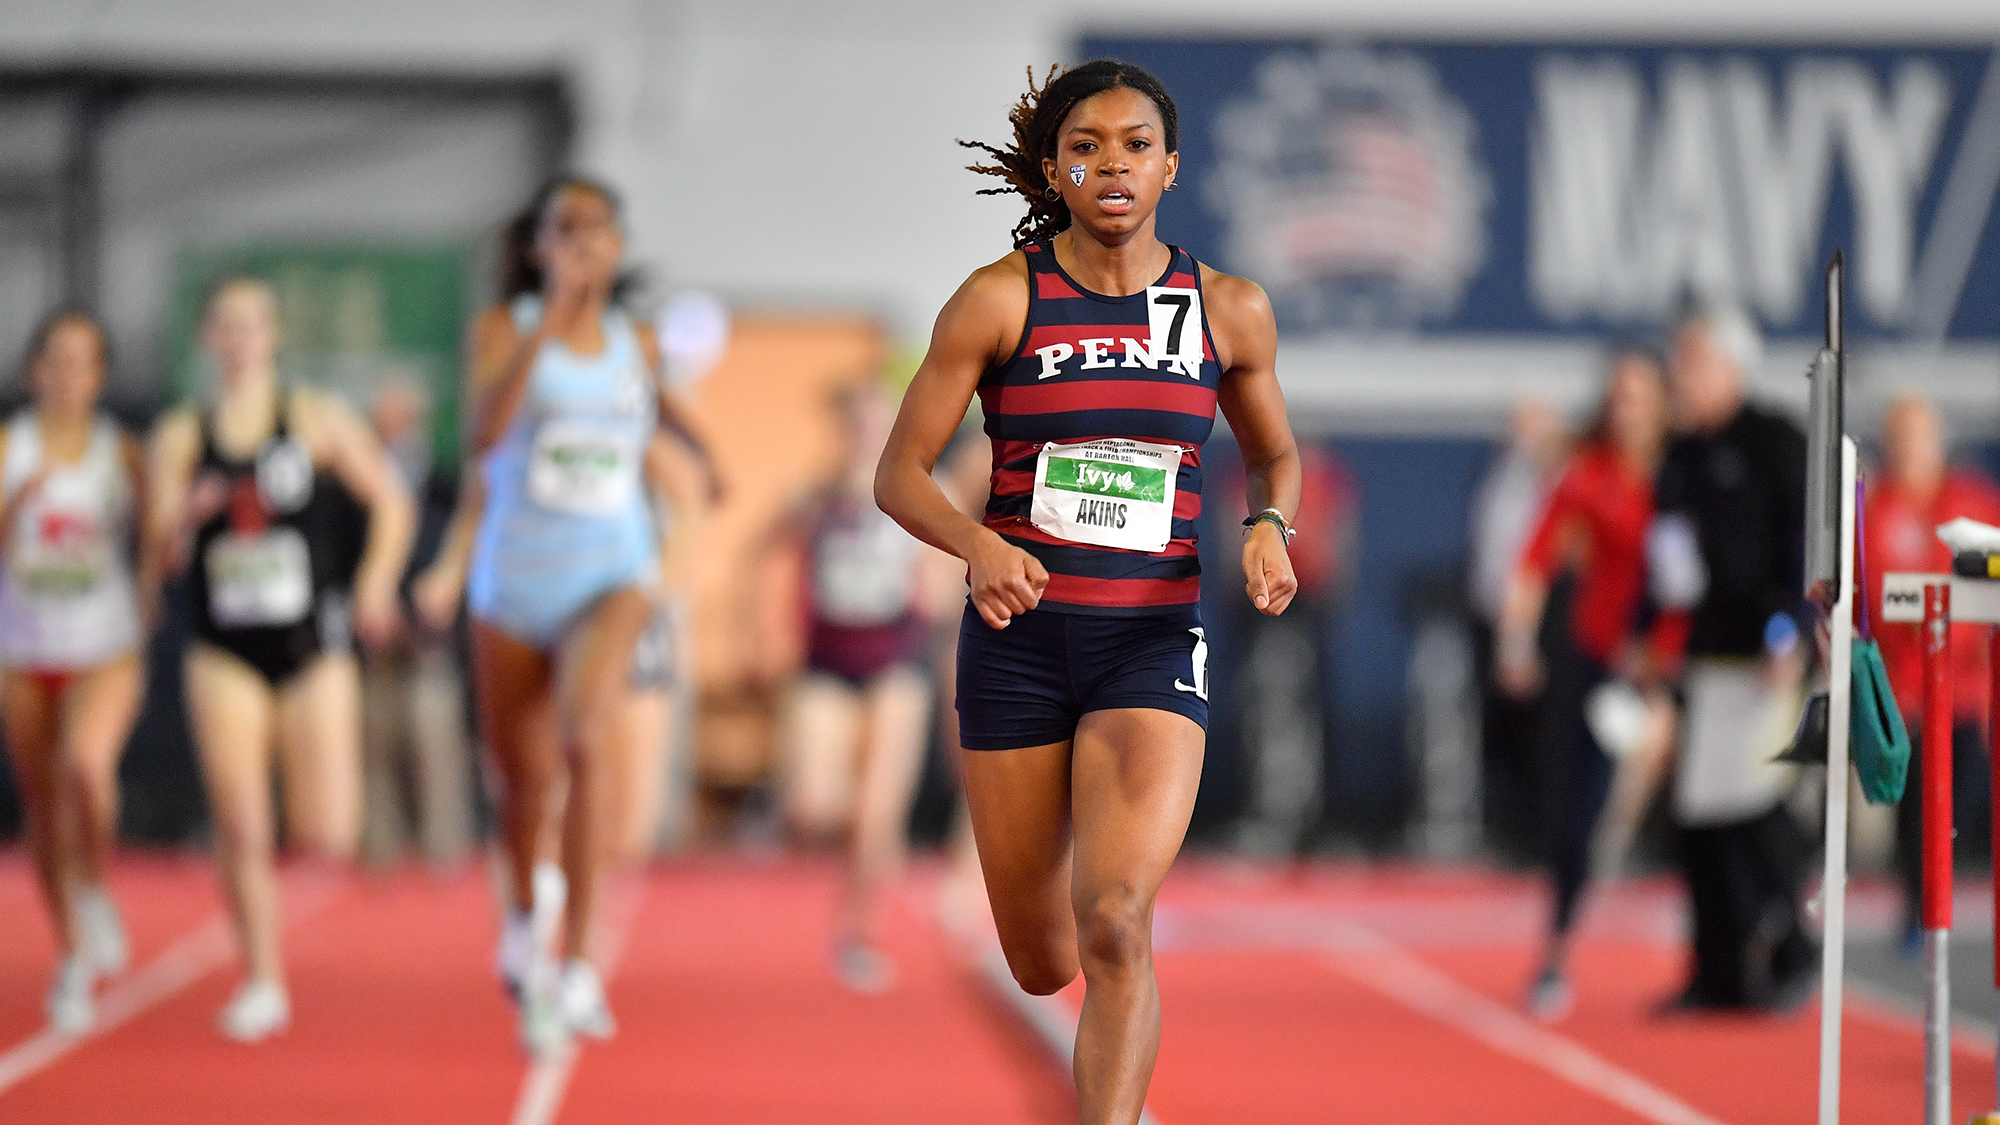 Nia Akins leads the pack during a race at an indoor track.